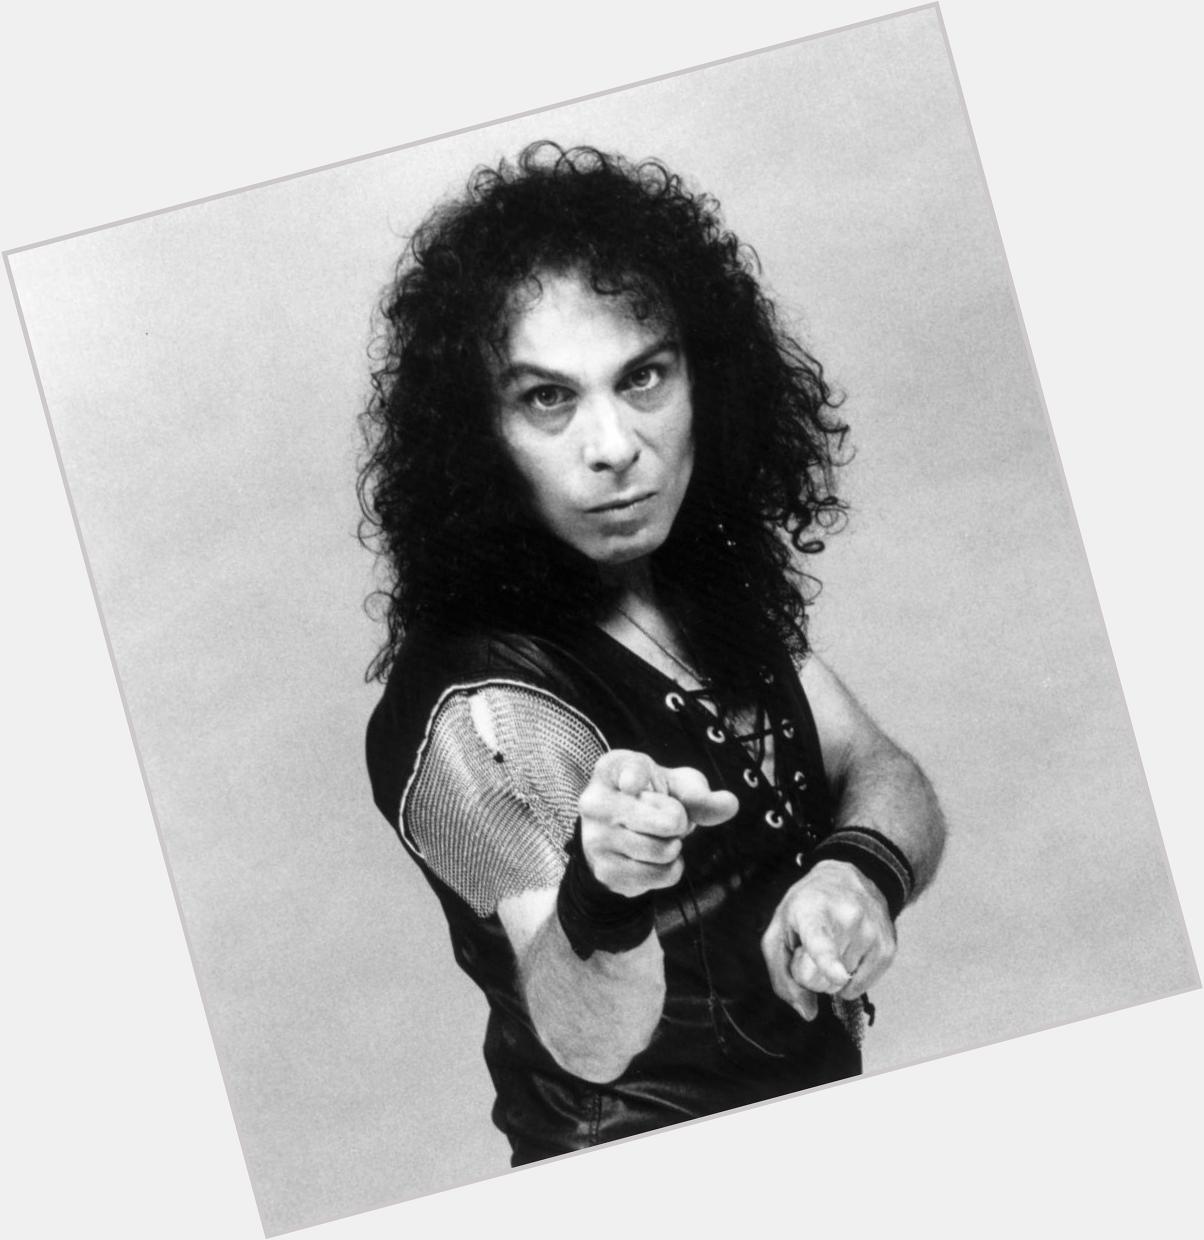 Happy birthday RONNIE JAMES DIO The black sheep in the family.
\"One day in the year of the fox...\" 